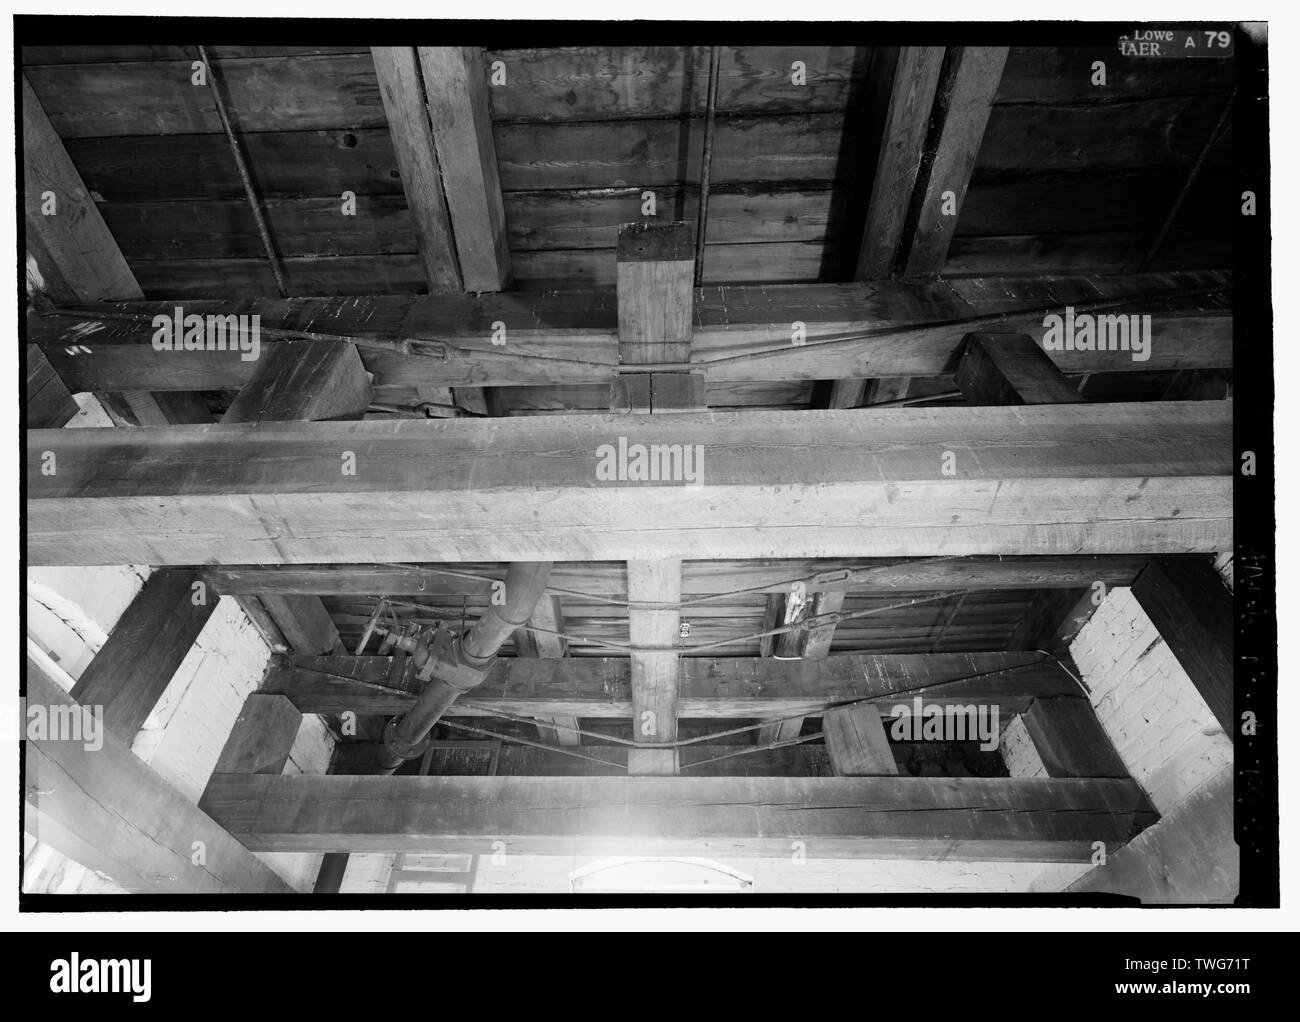 RAILROAD-STYLE REINFORCING BRACING BENEATH WATER TANK, THIRD FLOOR OF WATER TOWER. - Blue Spring Cotton Mill, Route 20, Oxford, Calhoun County, AL Stock Photo